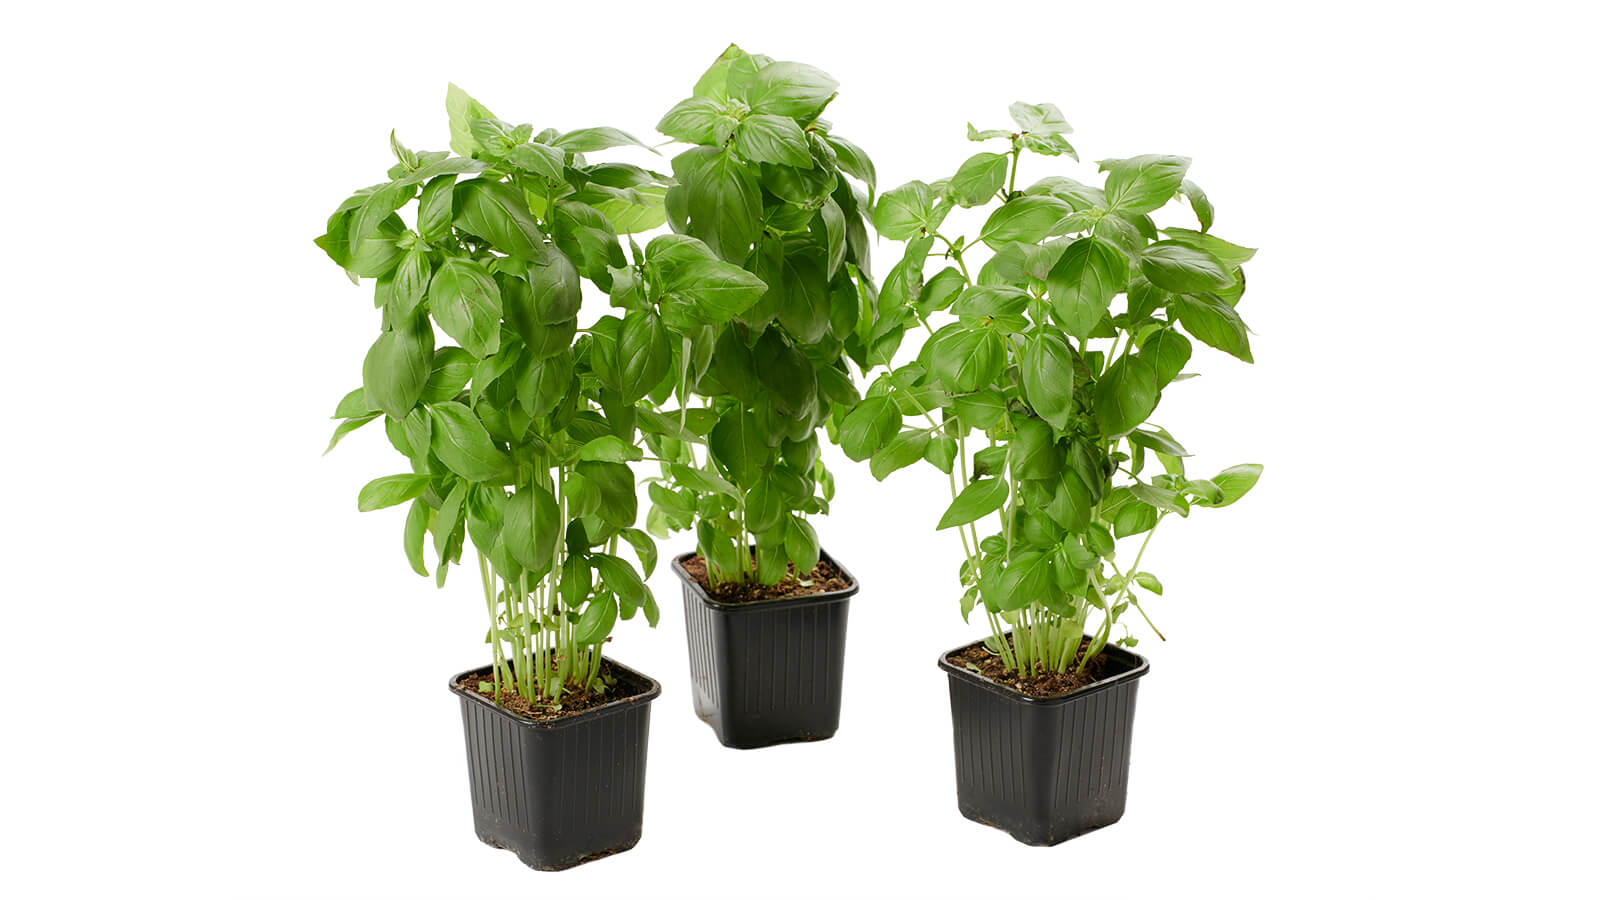 Potted Herbs - Basil